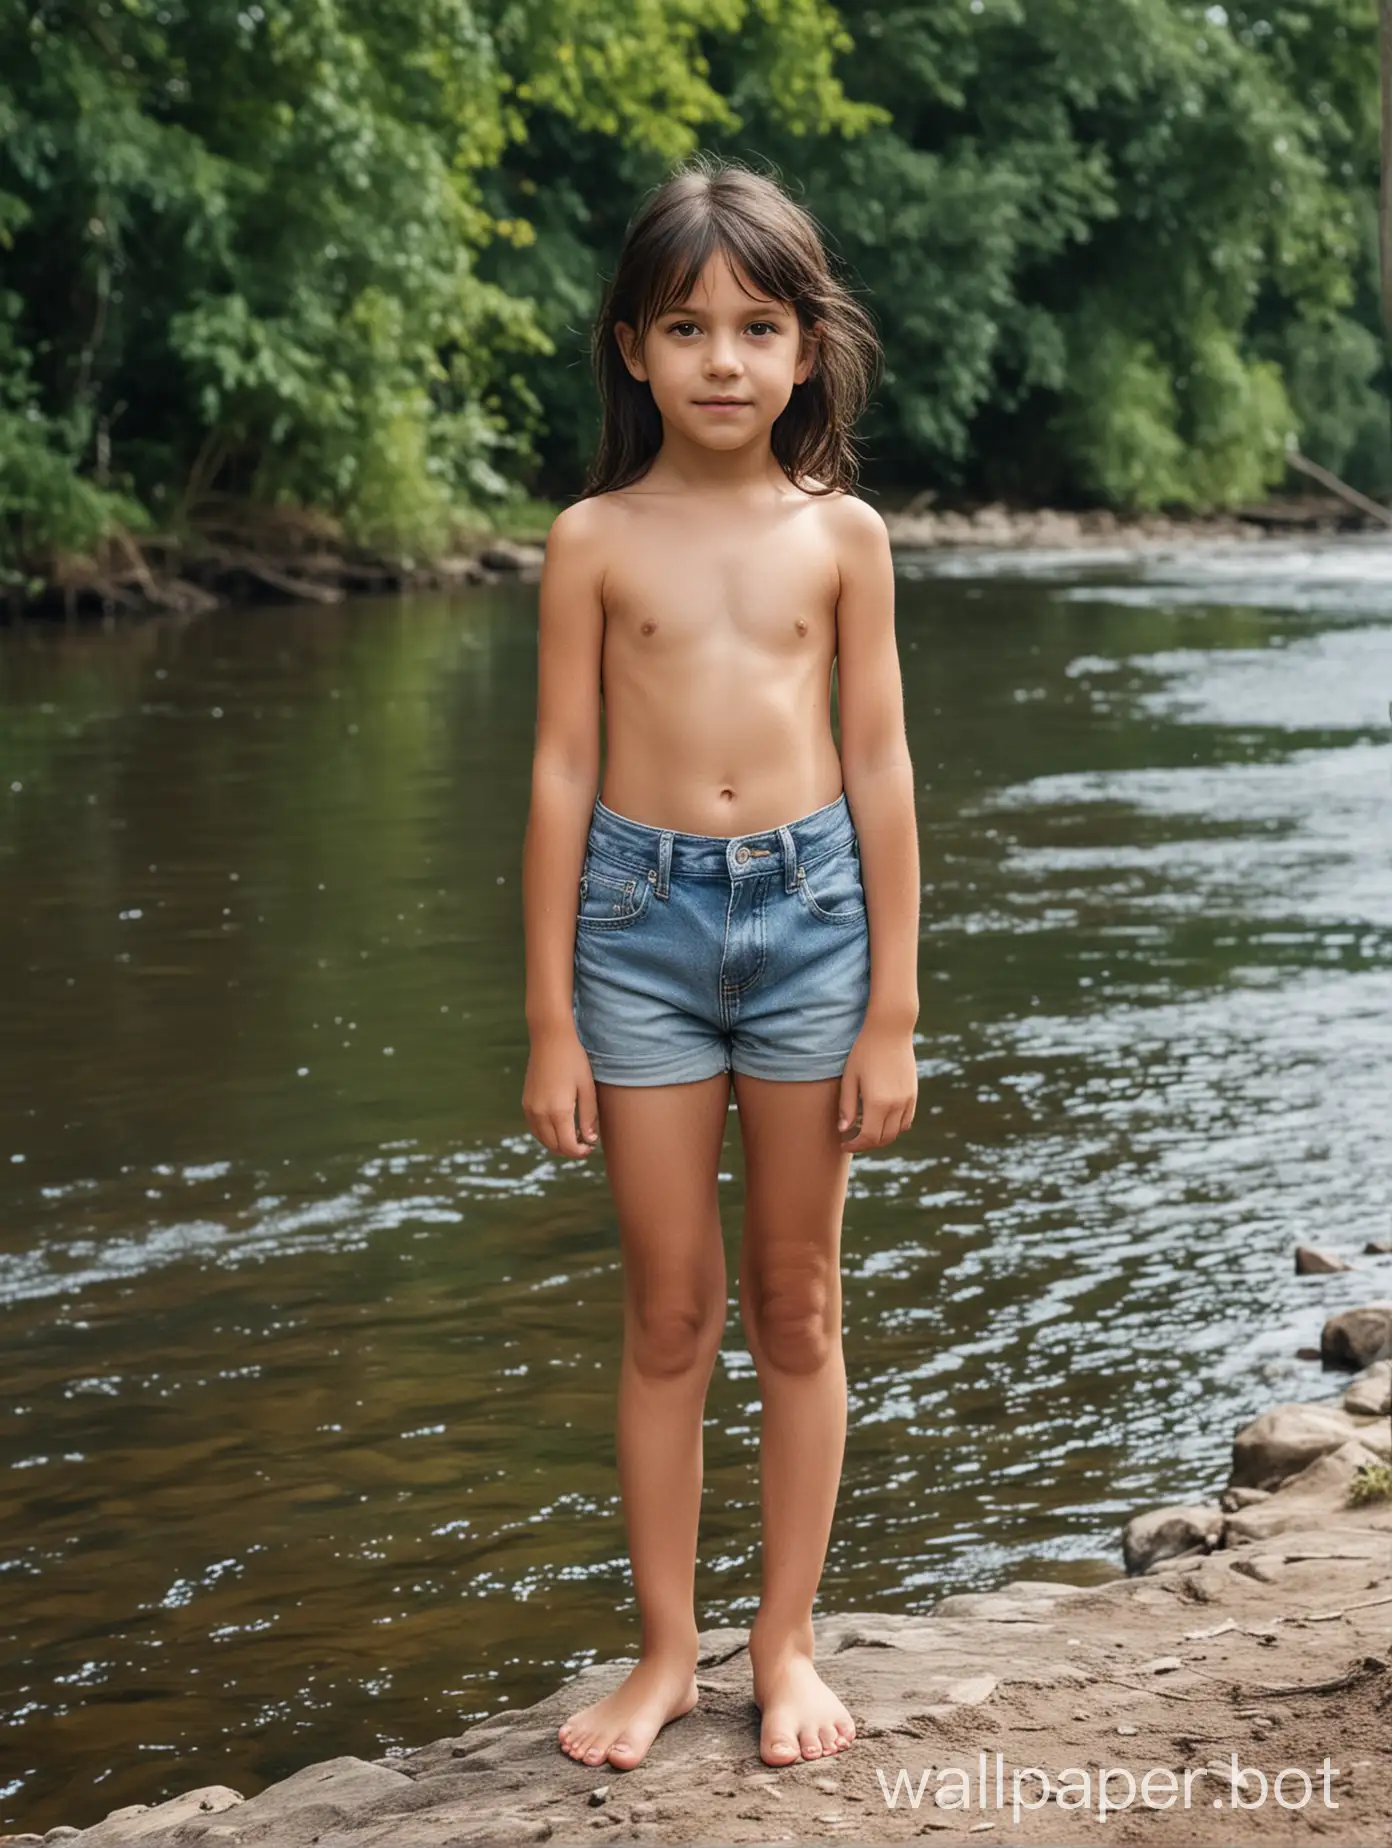 girl with dark hair, age 6 years old, topless in shorts standing beside a river